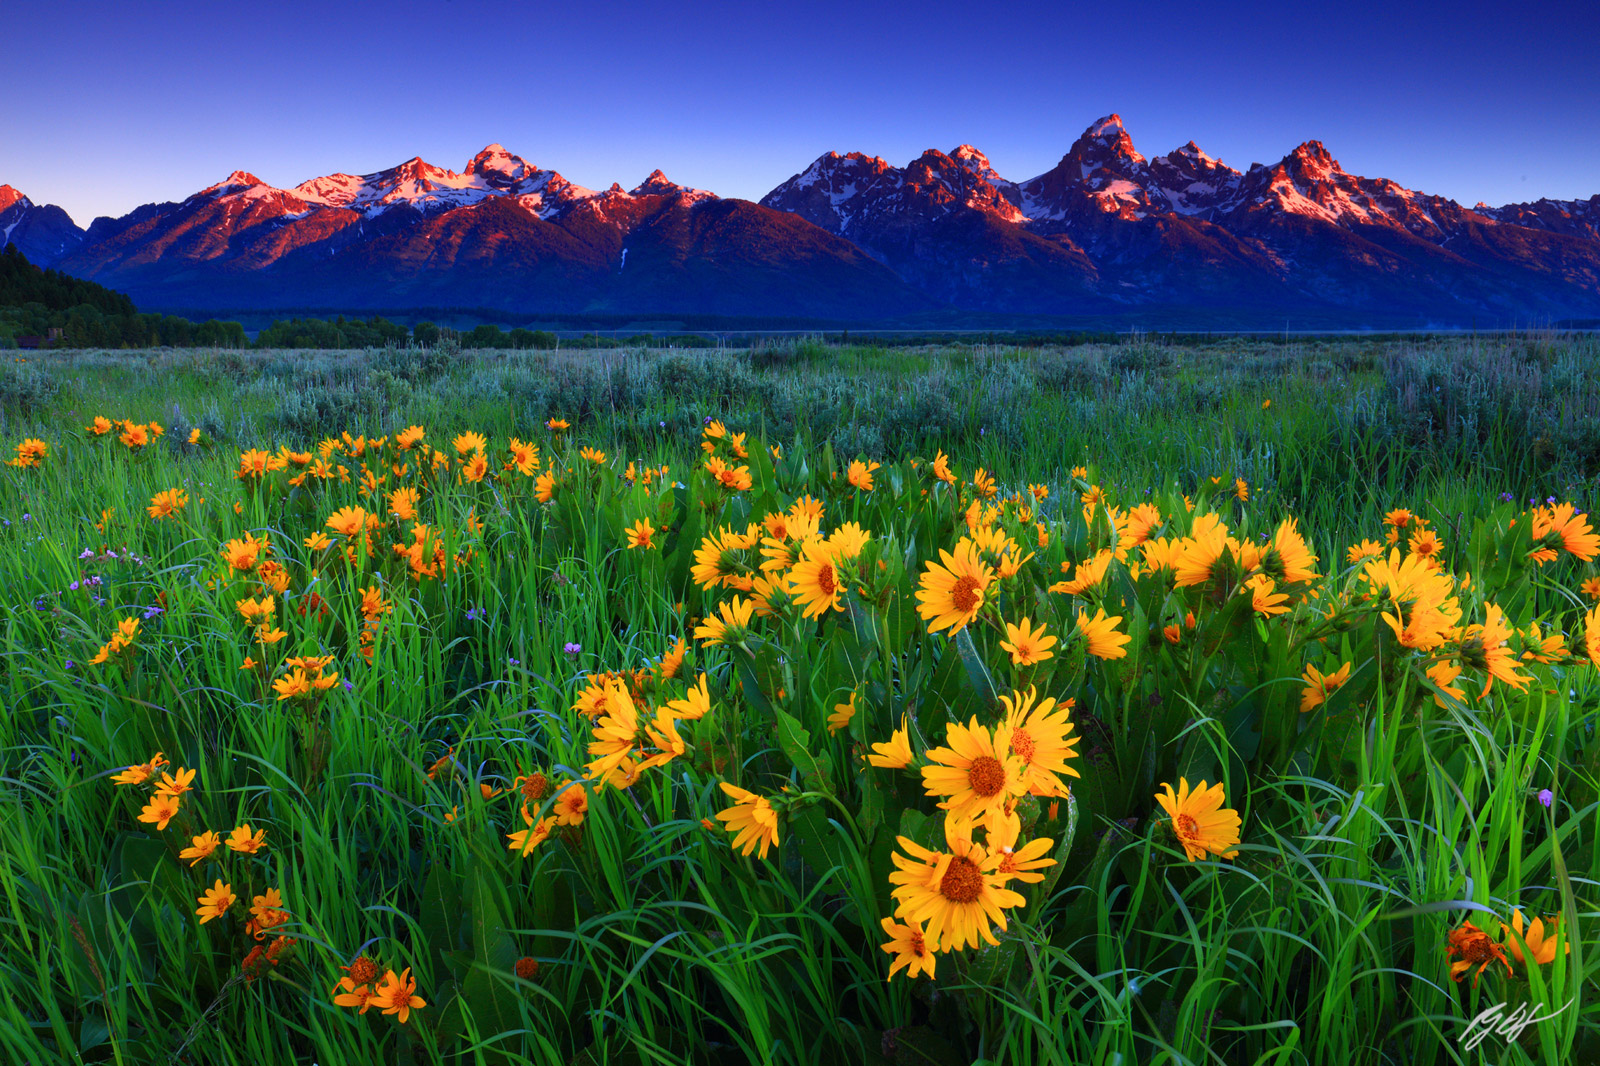 Sunrise Wildflowers and the Grand Tetons from Grand Teton National Park in Wyoming